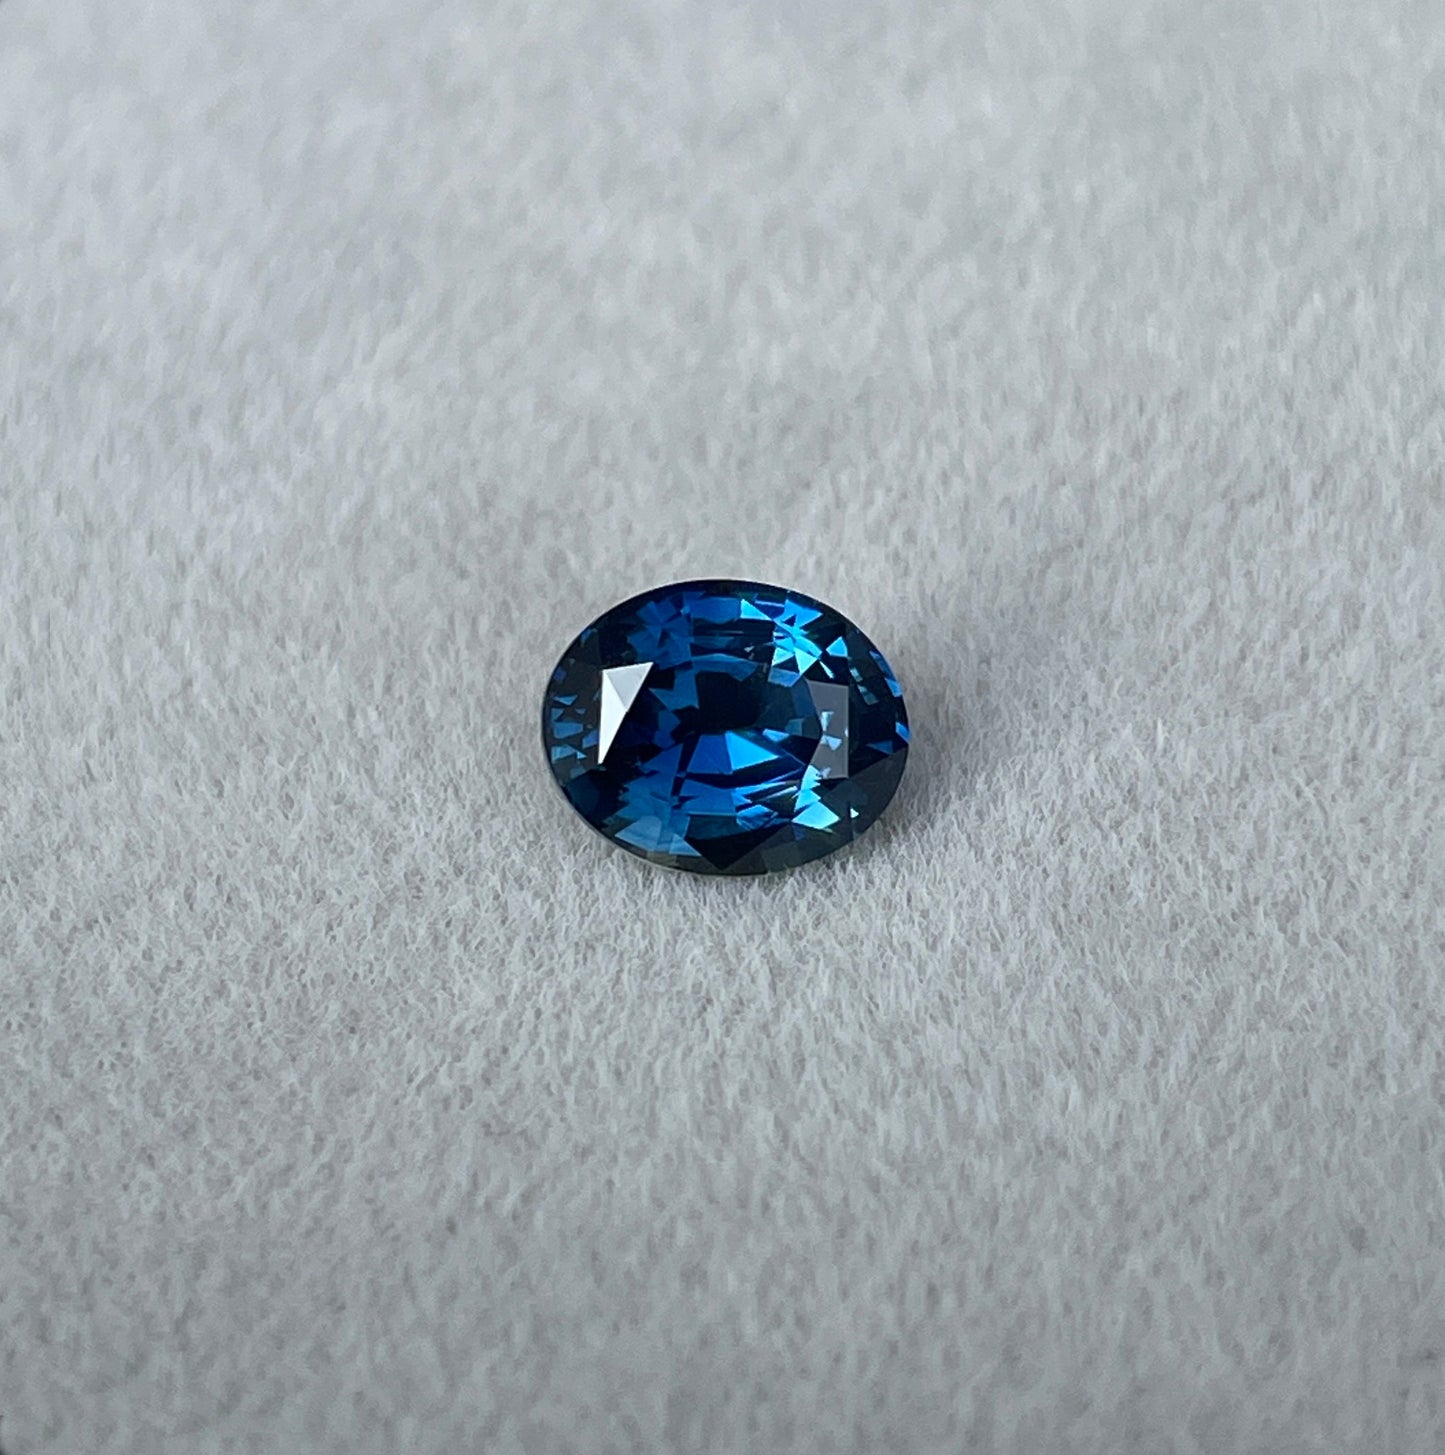 AAA Color Ceylon Blue Sapphire Loose Oval Cut Gemstone, Fine Quality Blue Sapphire Ring And Jewelry Making Gemstone 1.25 Ct - NASHGEMS